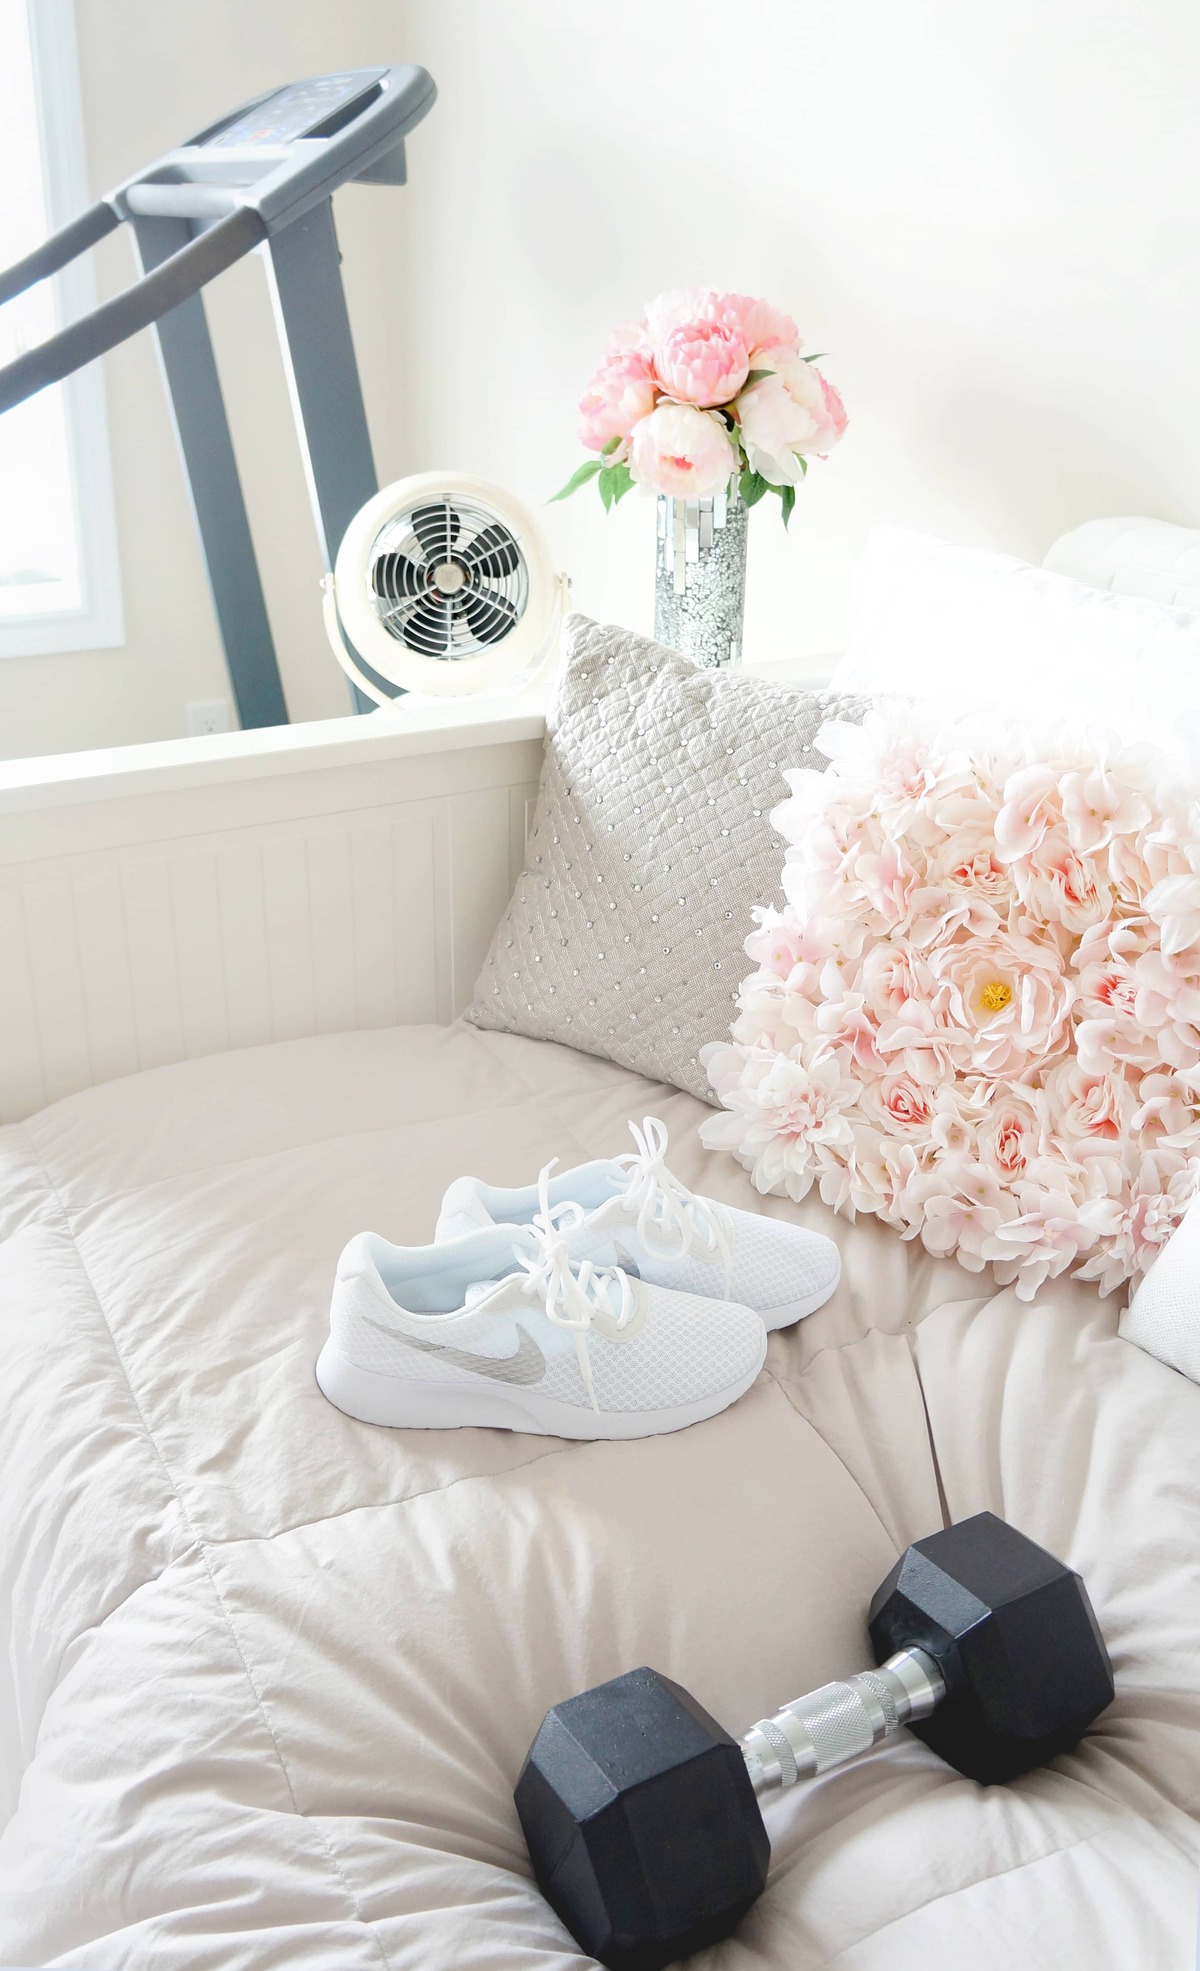 White workout shoes next to a dumbbell and a pink flower pillow